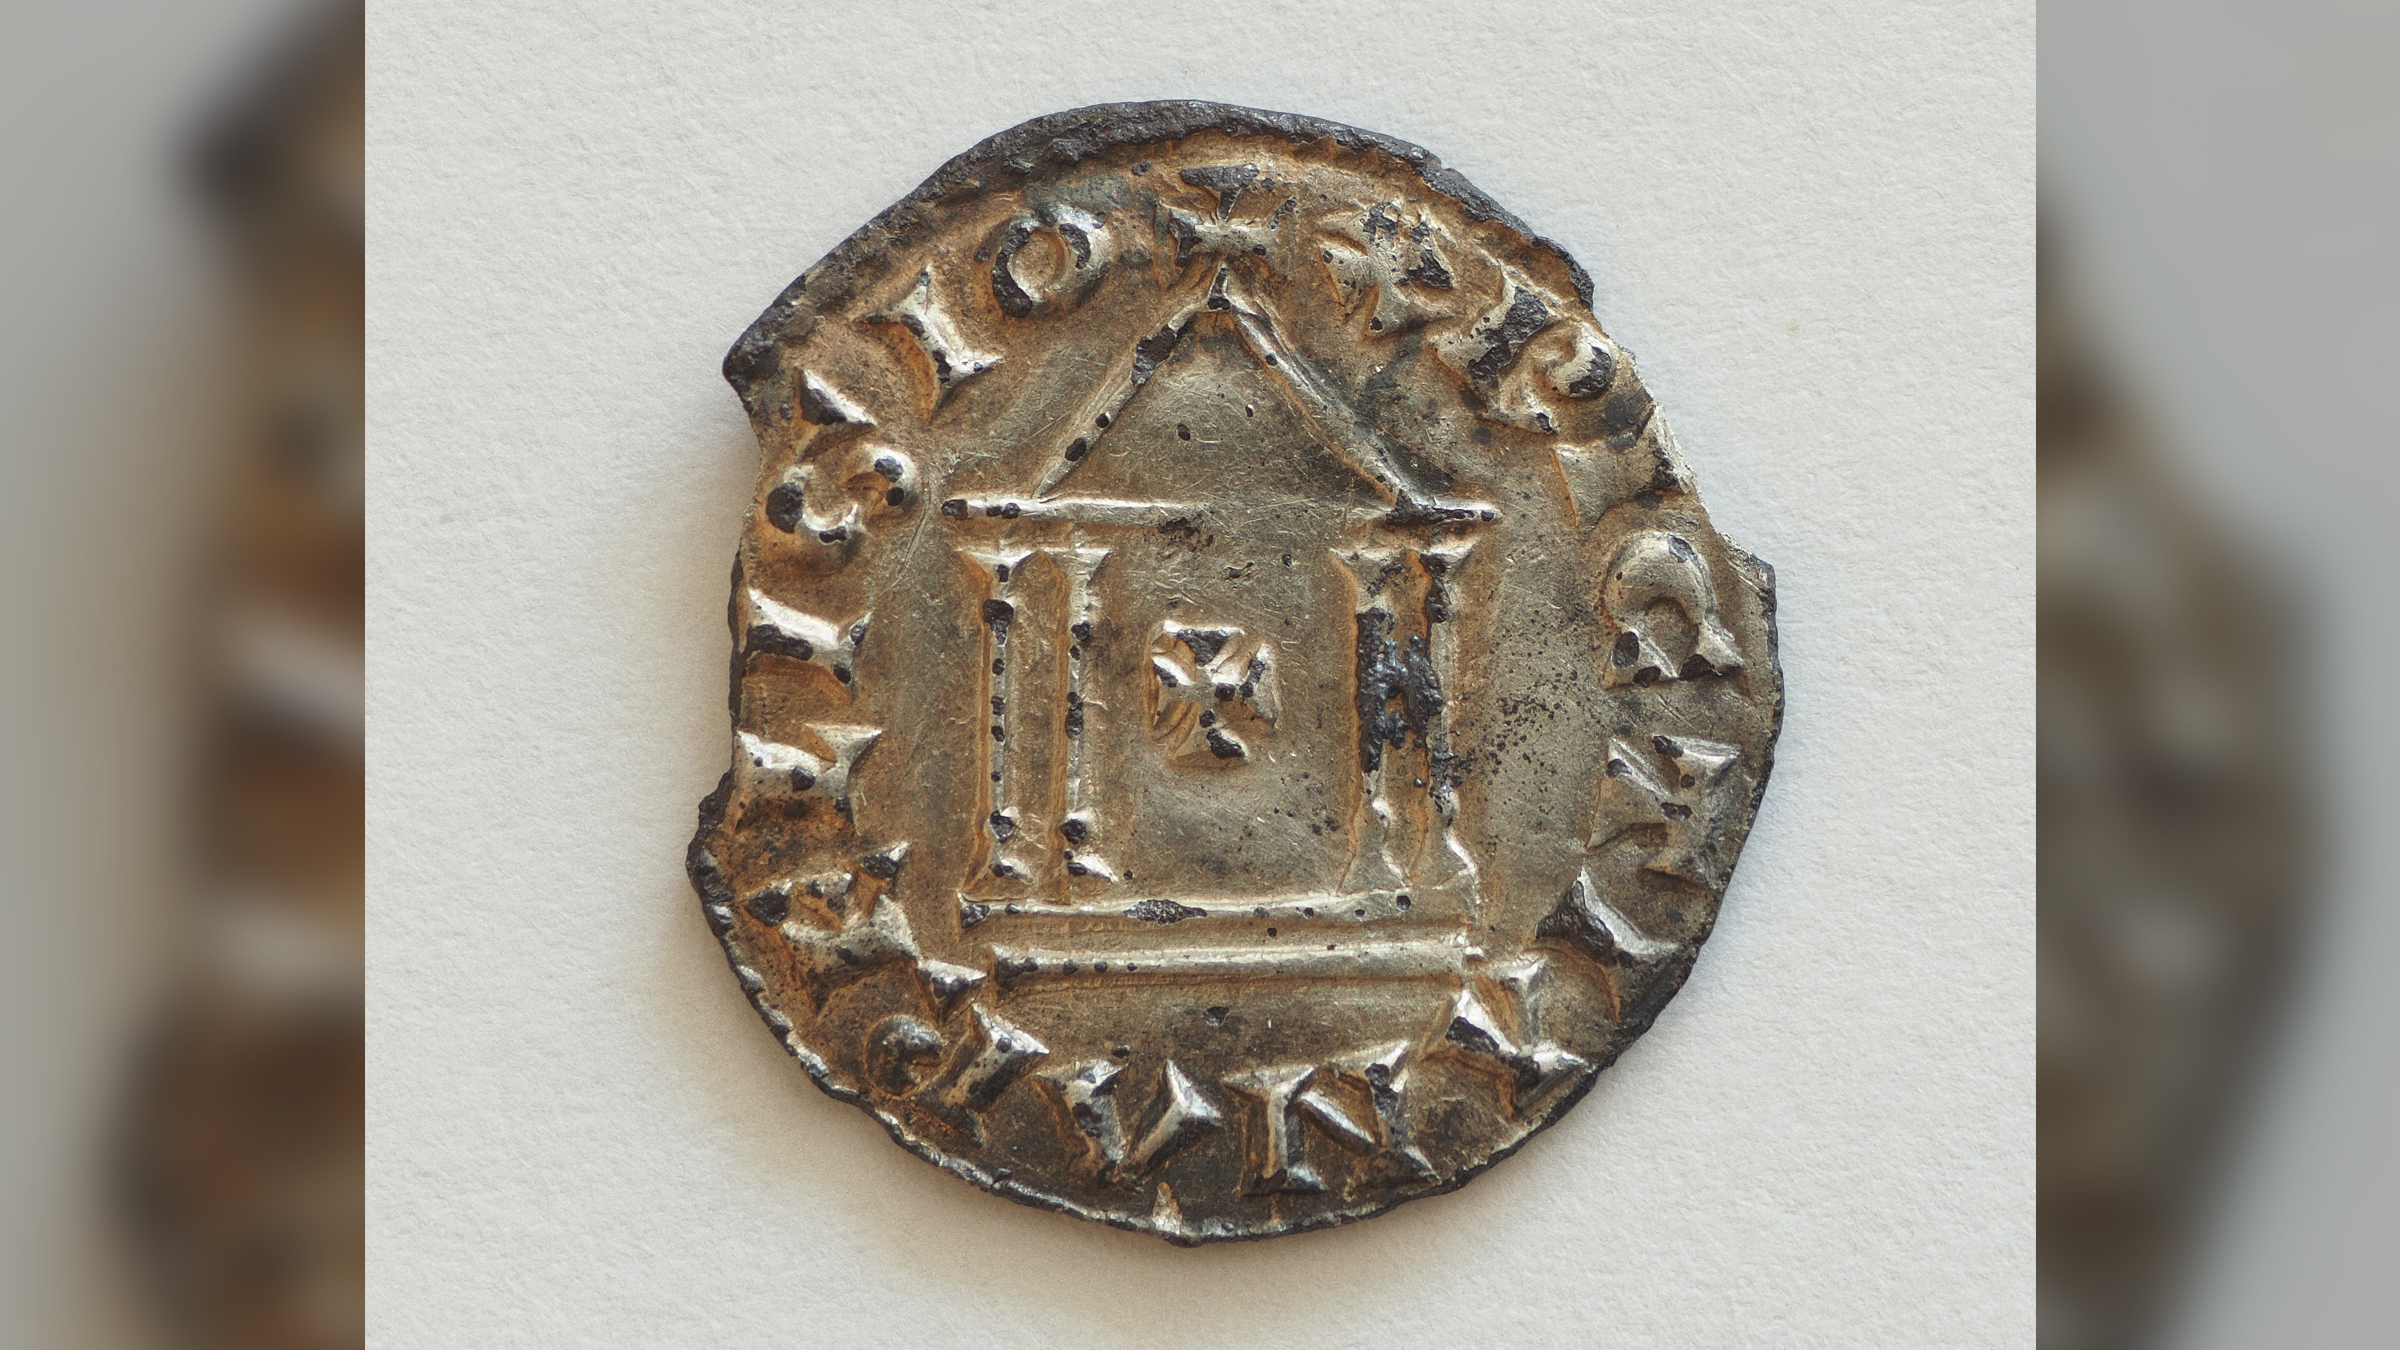 The back of the coin features a mix between a Roman temple and a church.